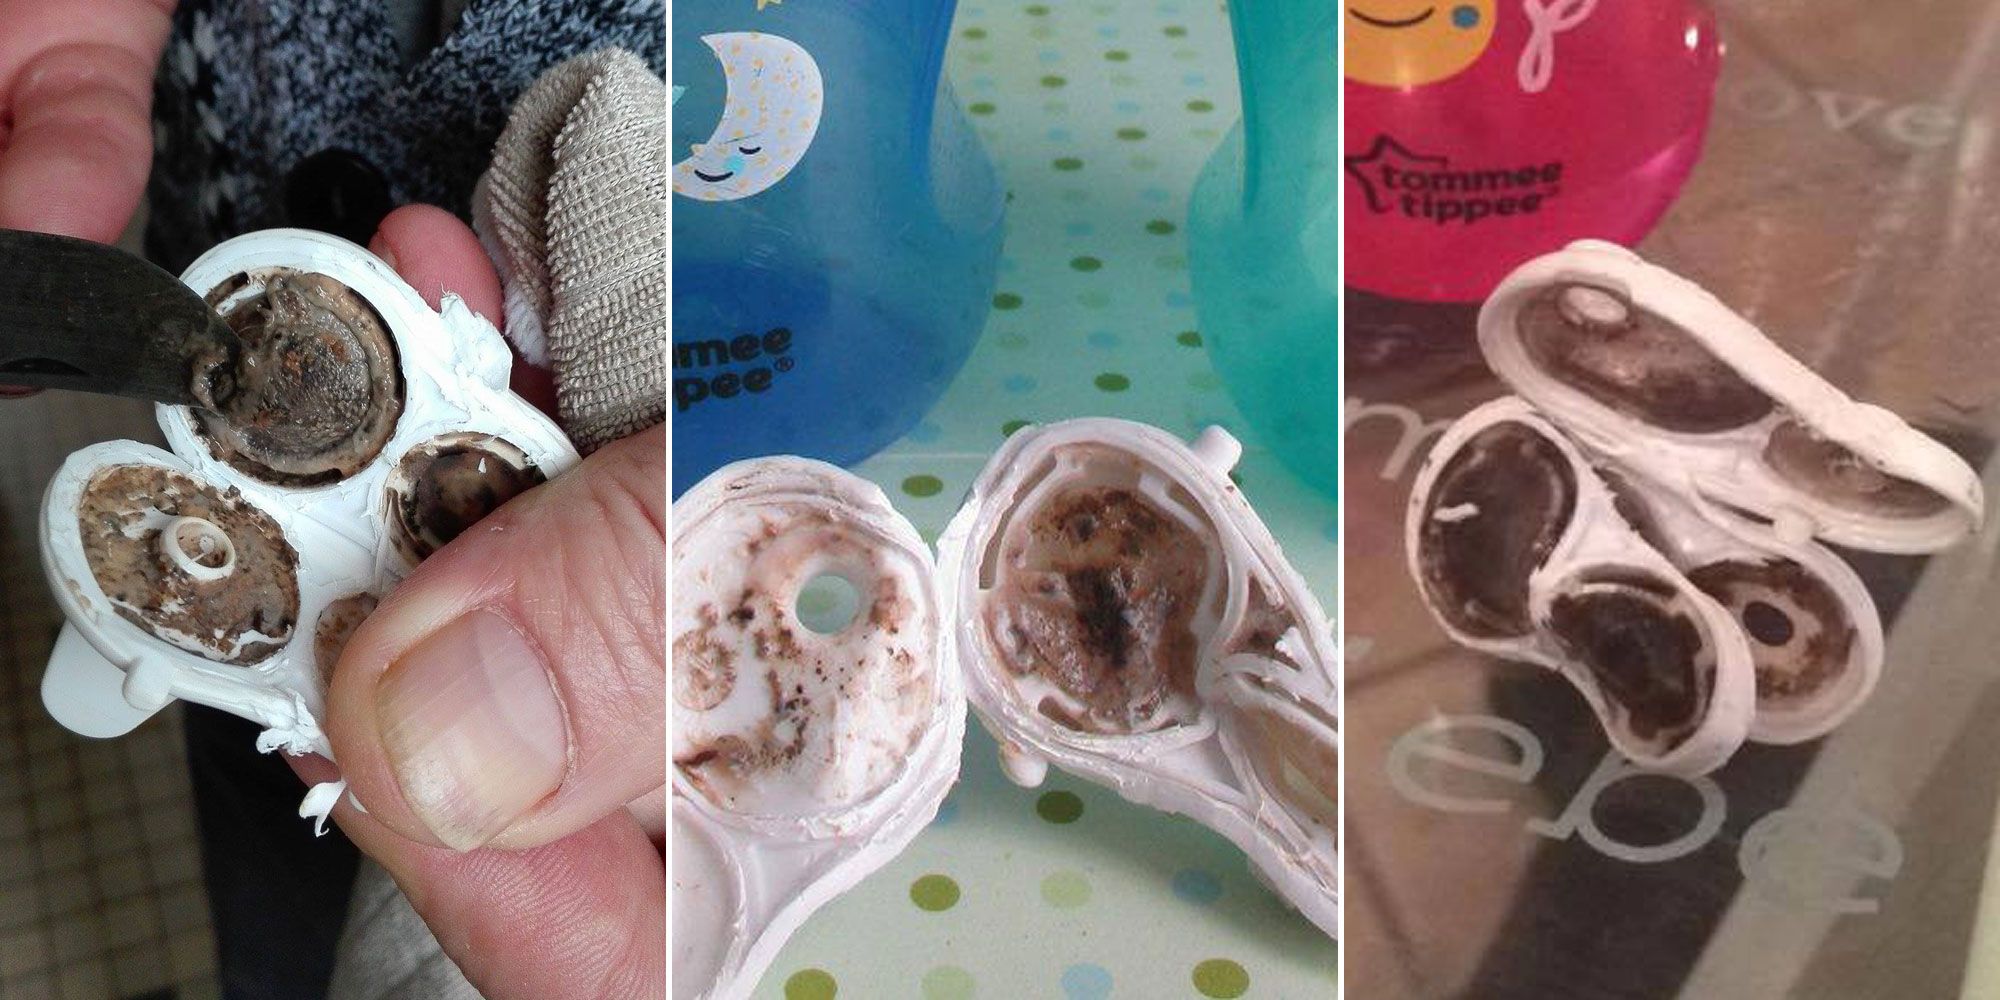 Moldy sippy cups frighten parents